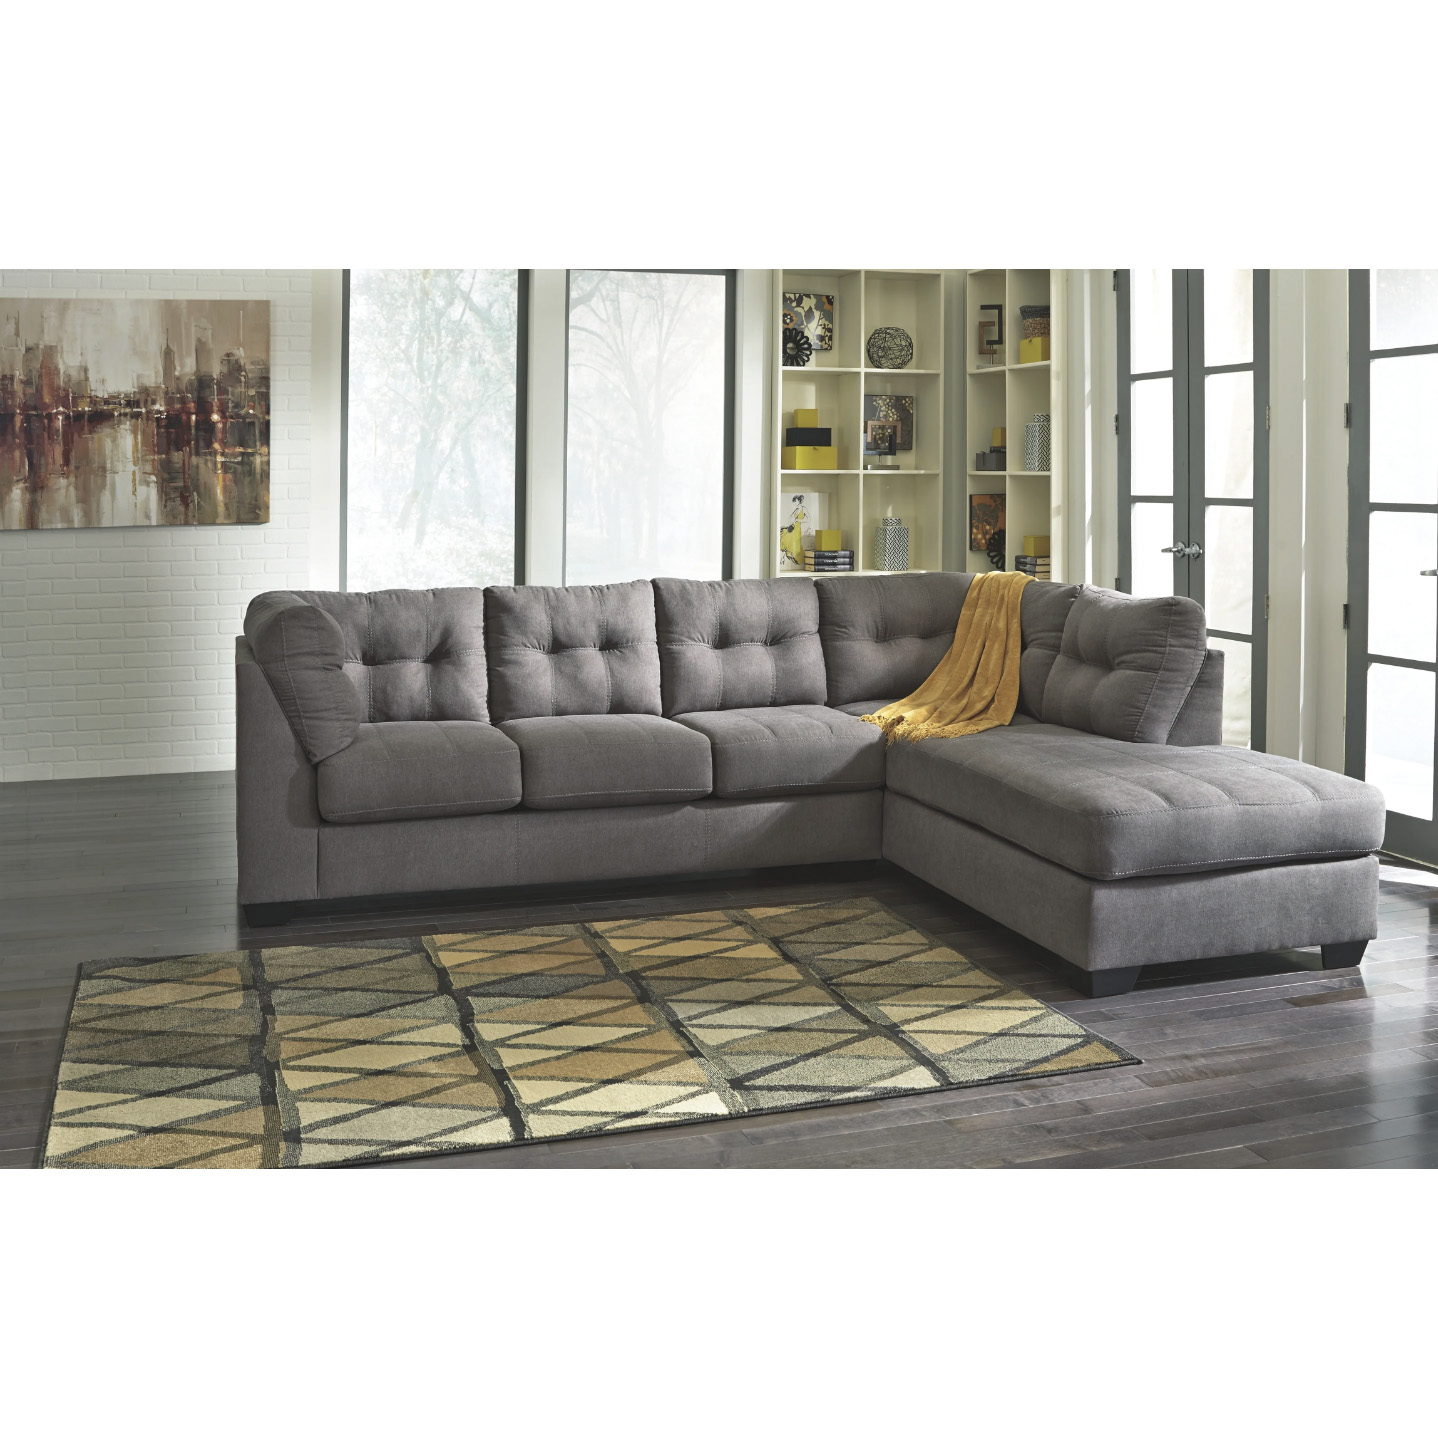 Maier - Charcoal - LAF Sofa & RAF Corner Chaise Sectional